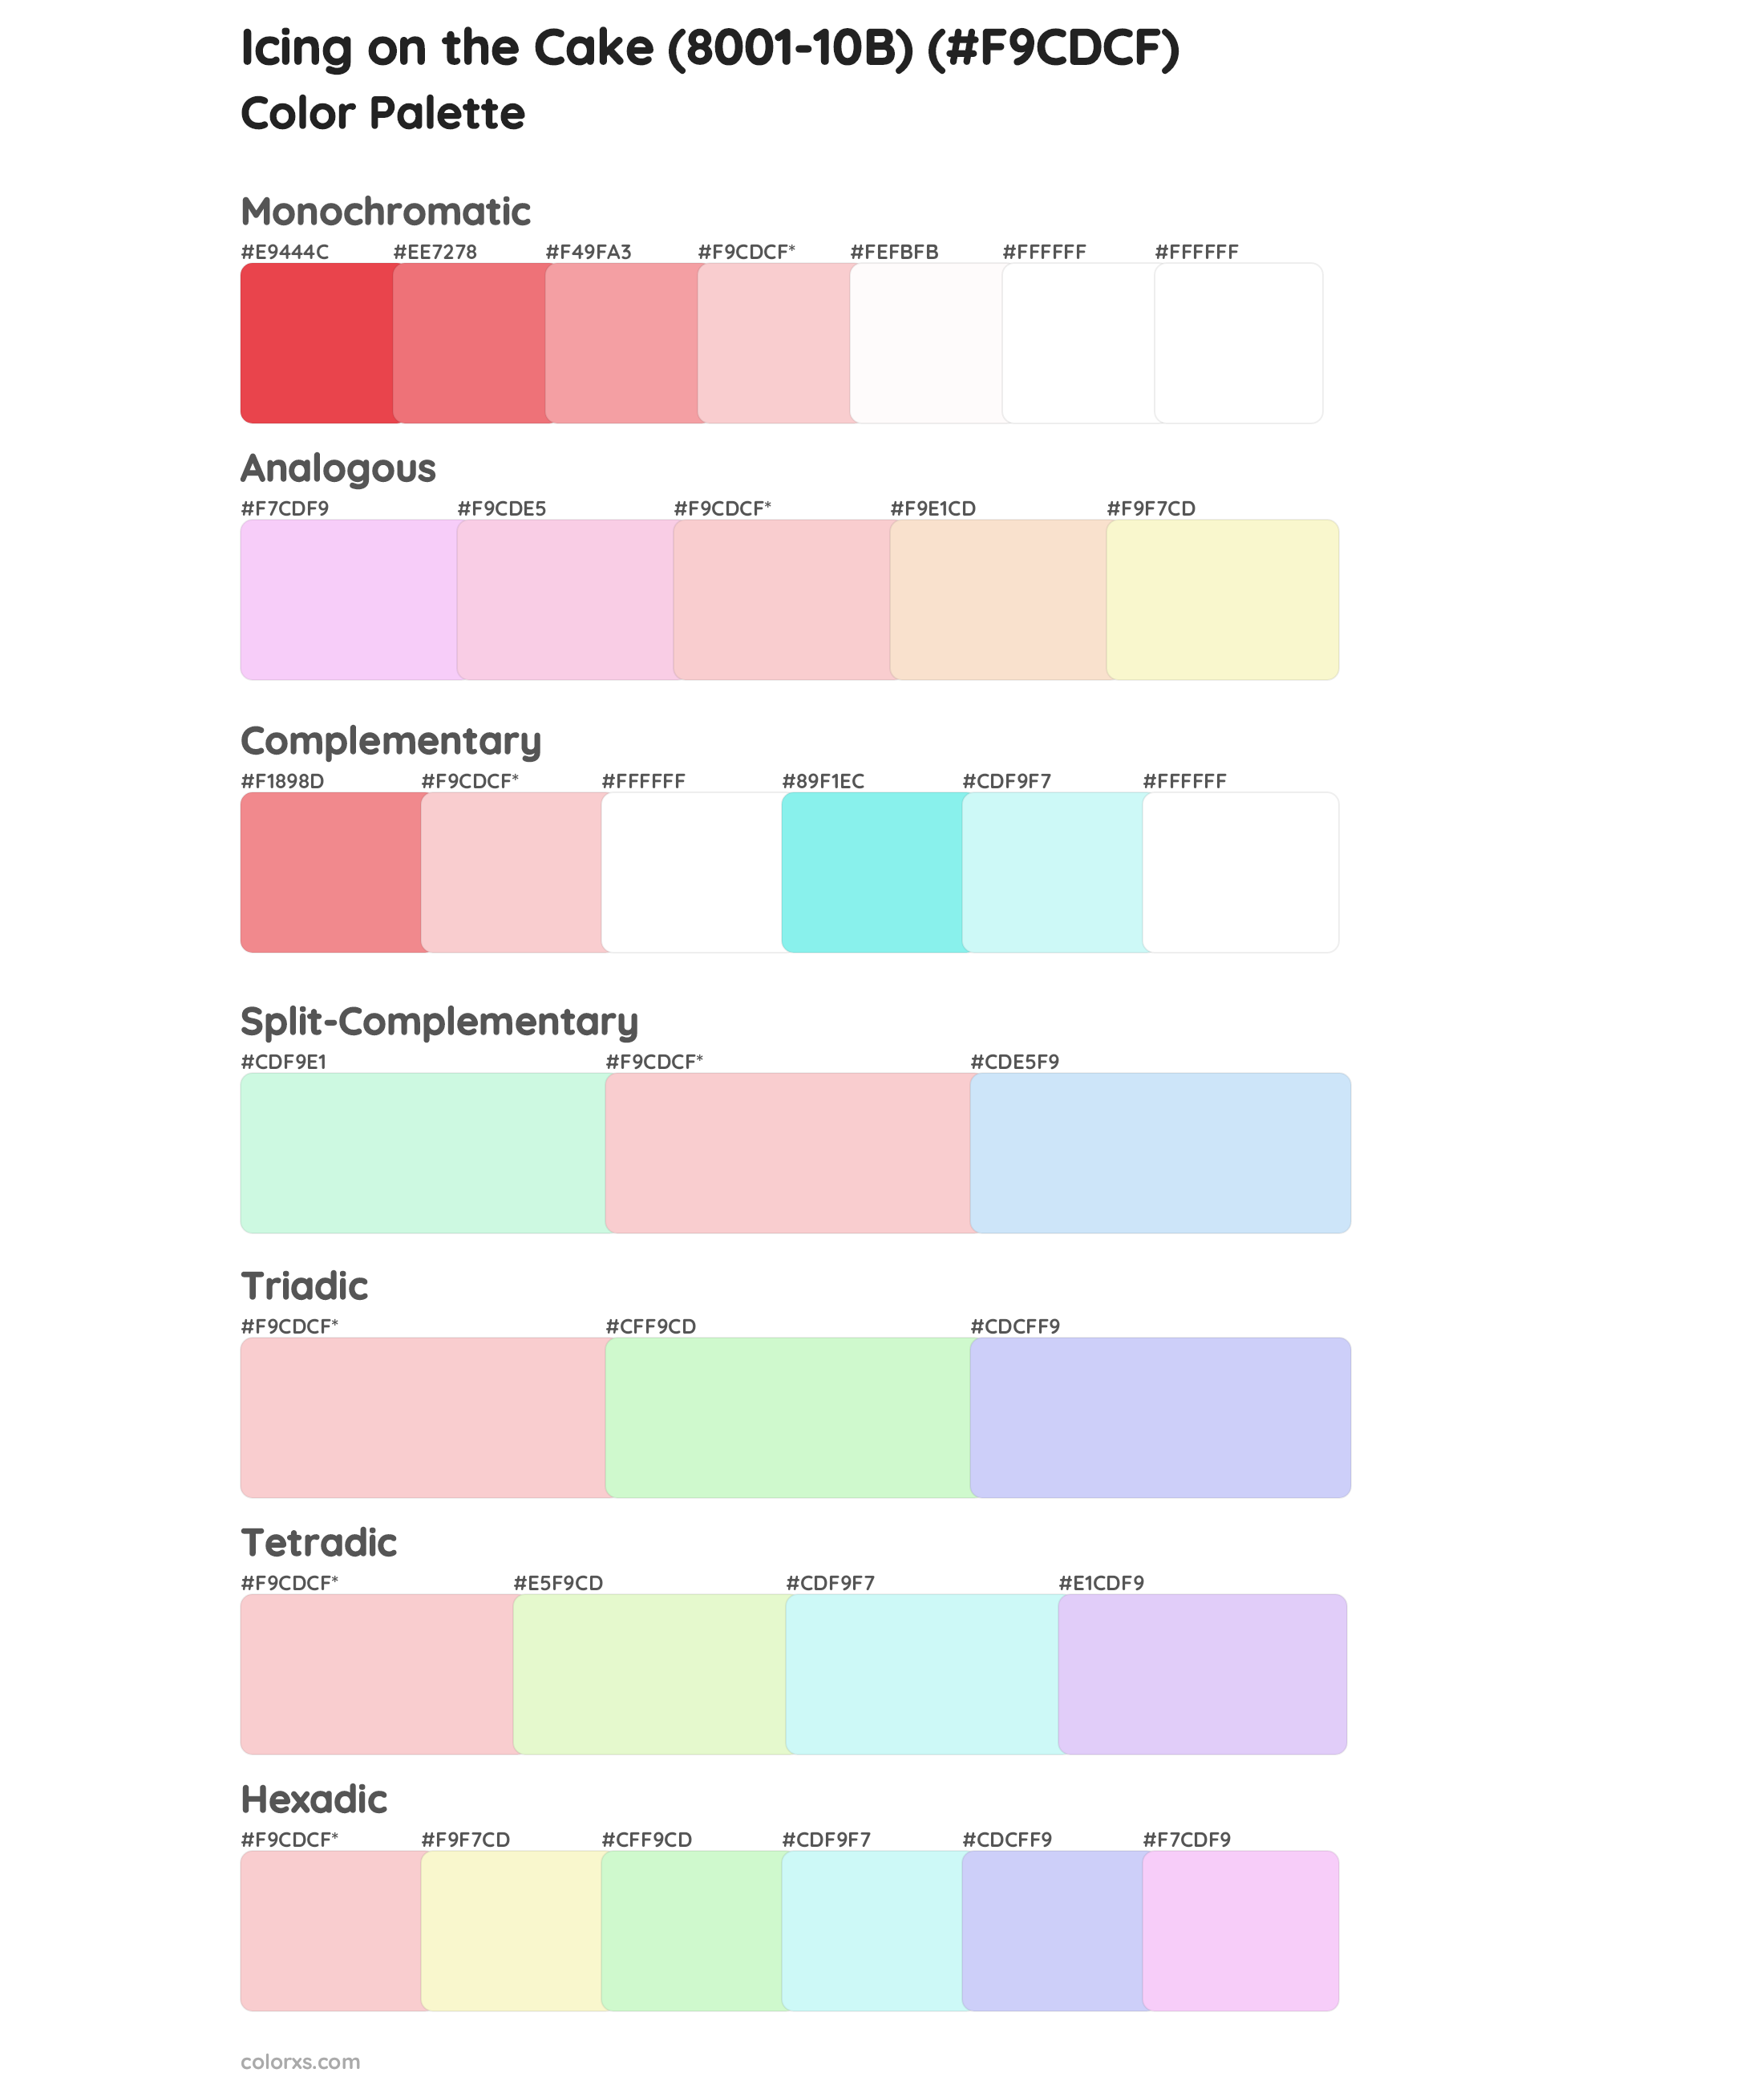 Icing on the Cake (8001-10B) Color Scheme Palettes